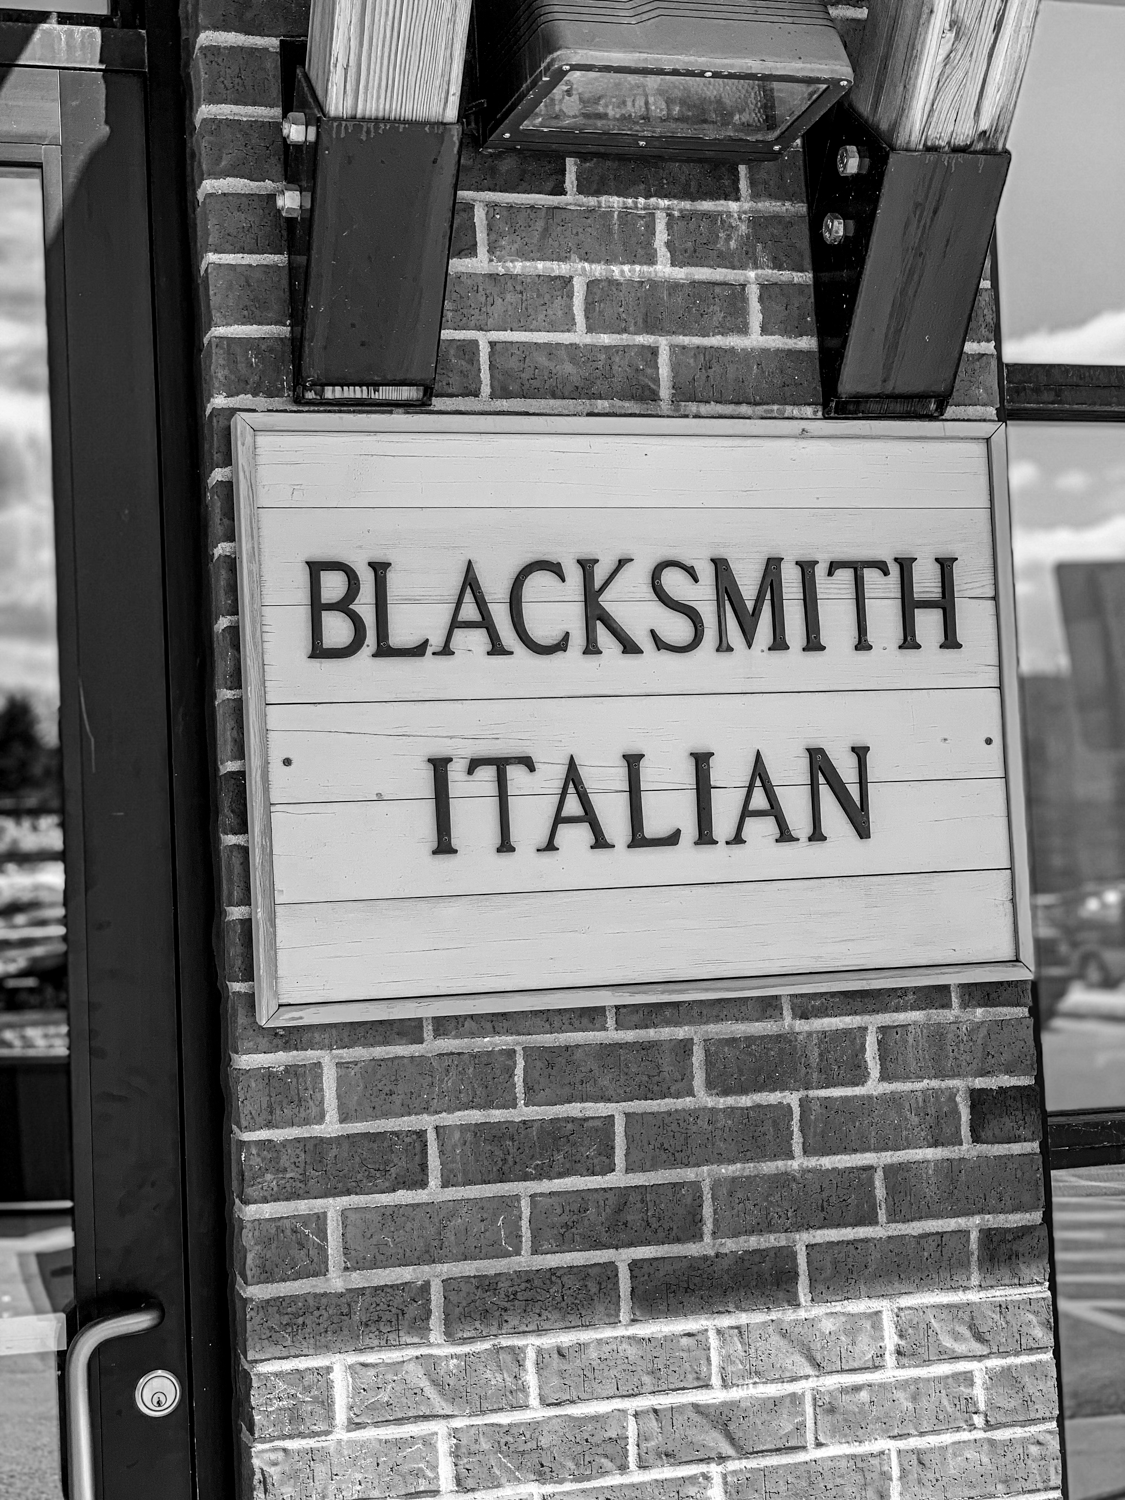 Dinner at Blacksmith Italian – A Truly Magnificent Meal by Steven Shomler Culinary Treasure Network 